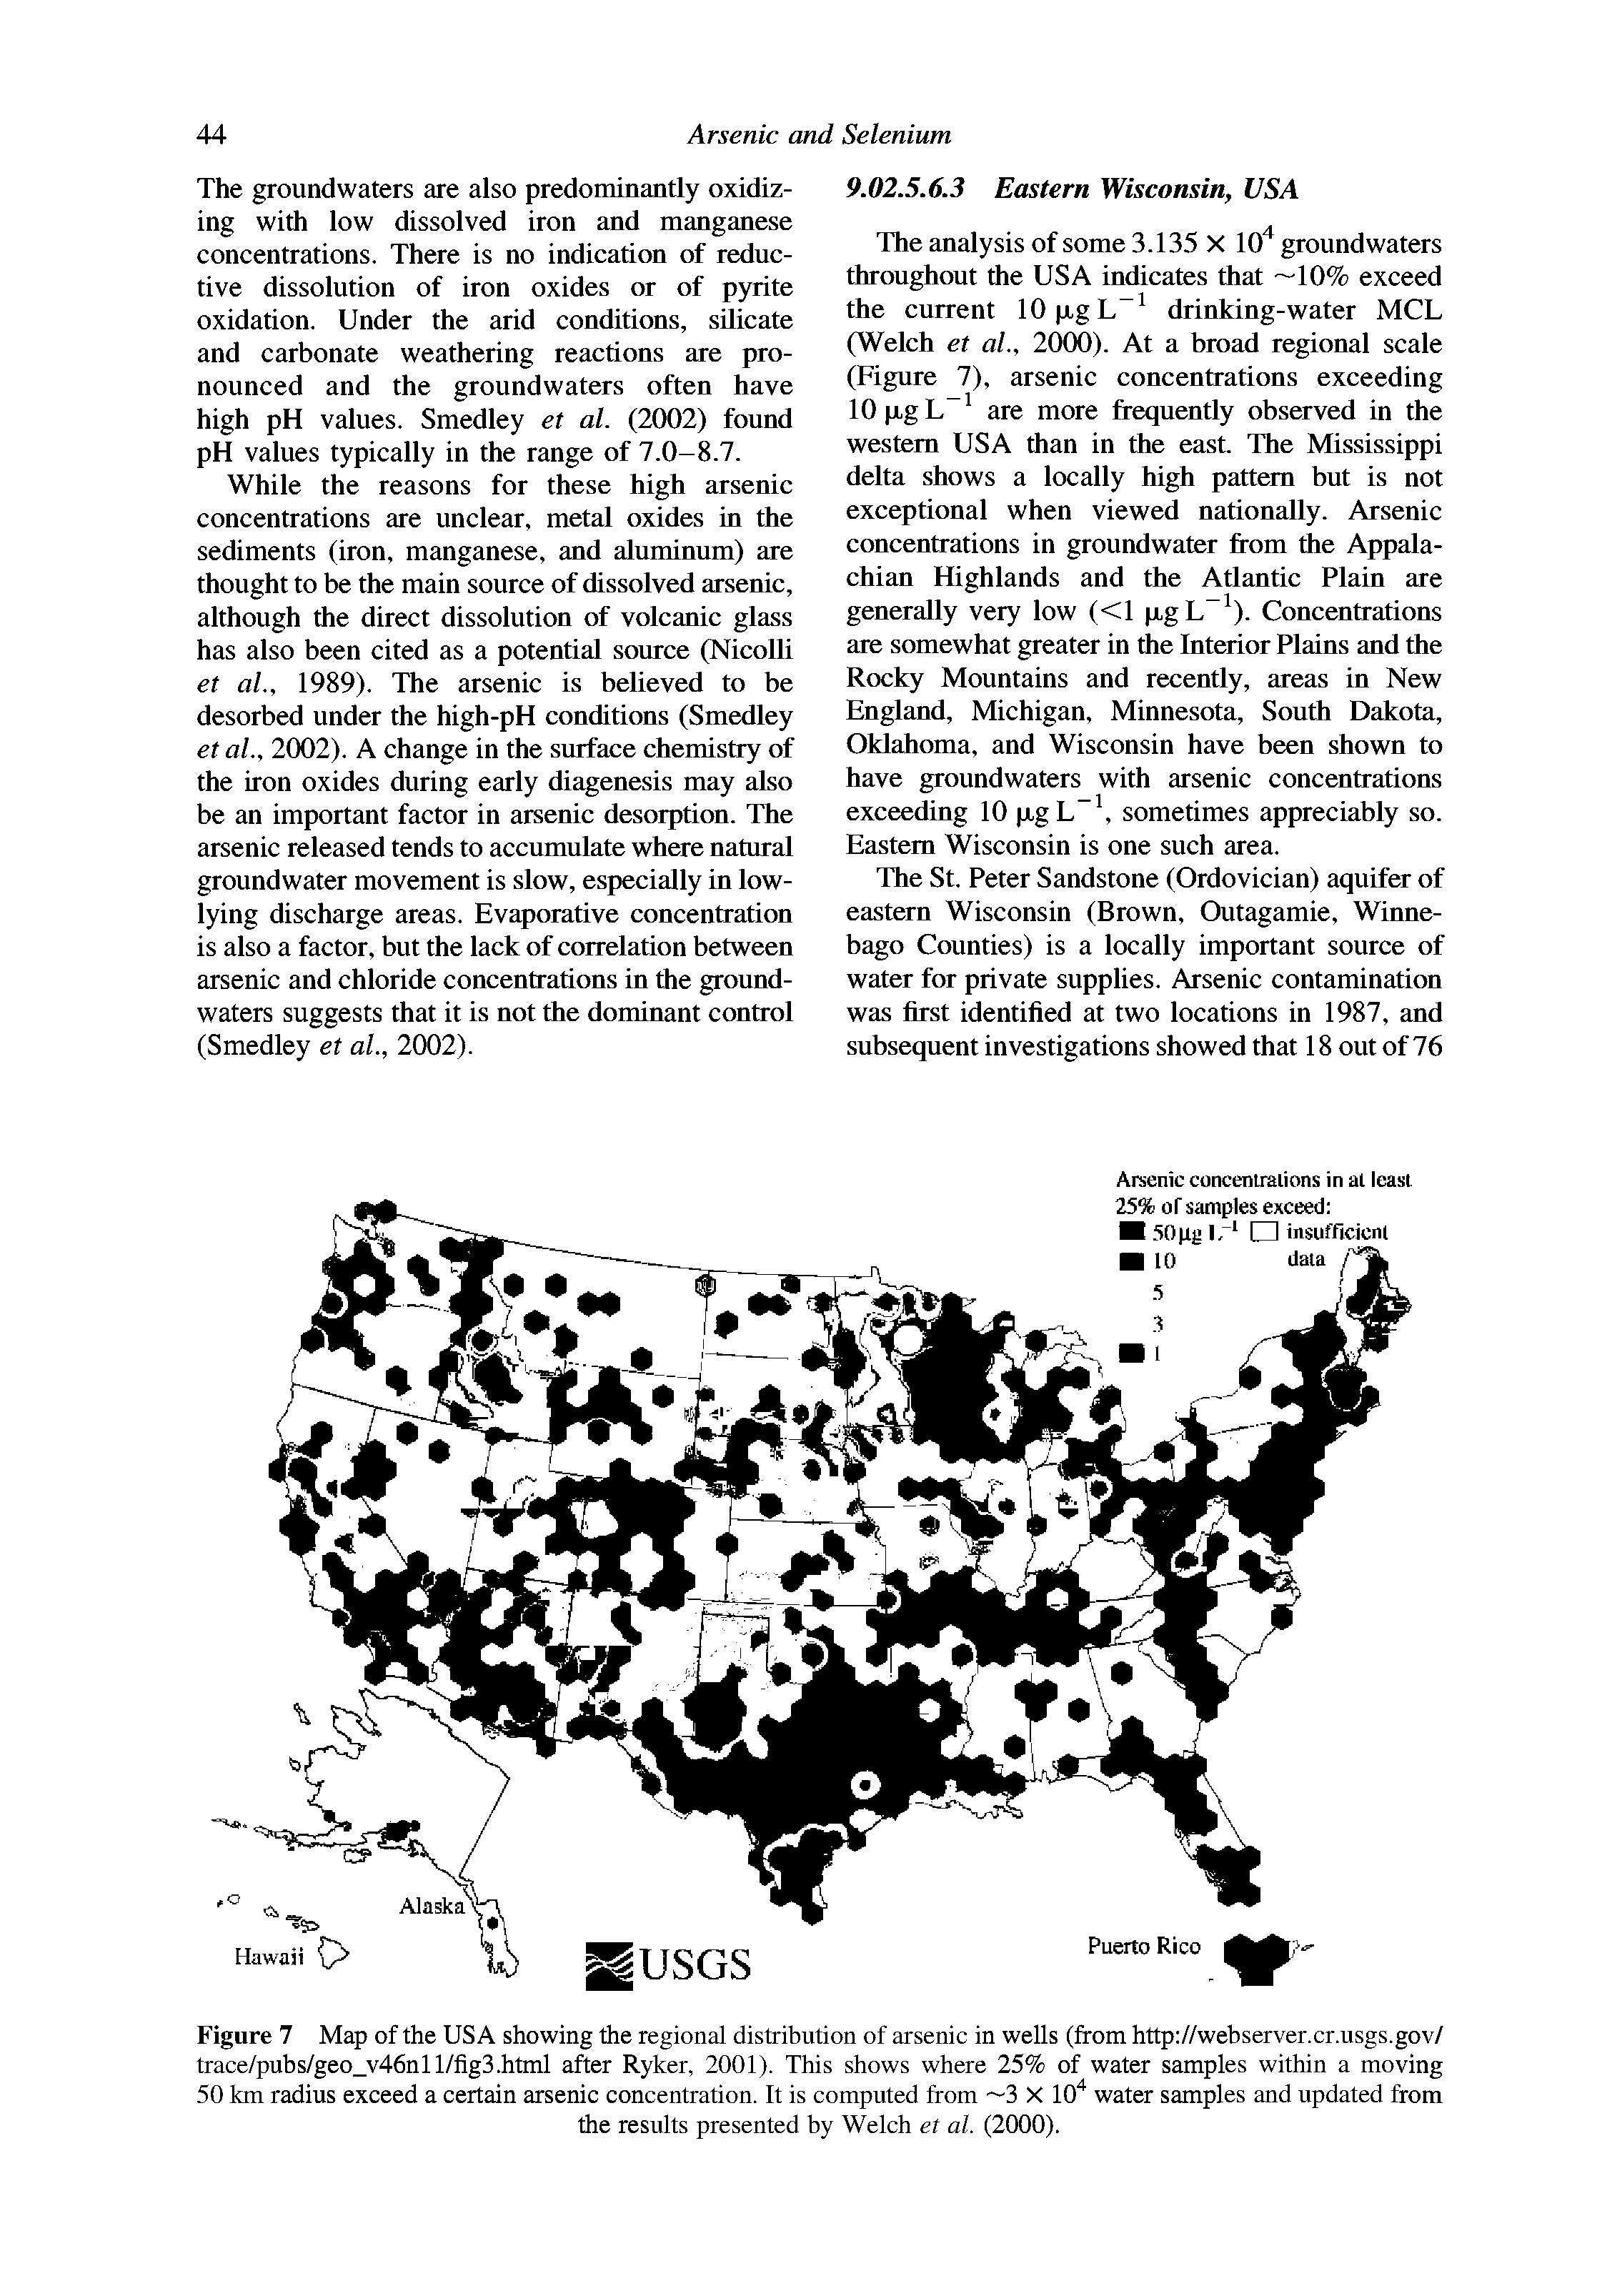 Figure 7 Map of the USA showing the regional distribution of arsenic in wells (from http //webserver.cr.usgs.gov/ trace/pubs/geo v46nll/fig3.html after Ryker, 2001). This shows where 25% of water samples within a moving 50 km radius exceed a certain arsenic concentration. It is computed from —3 X 10" water samples and updated from...